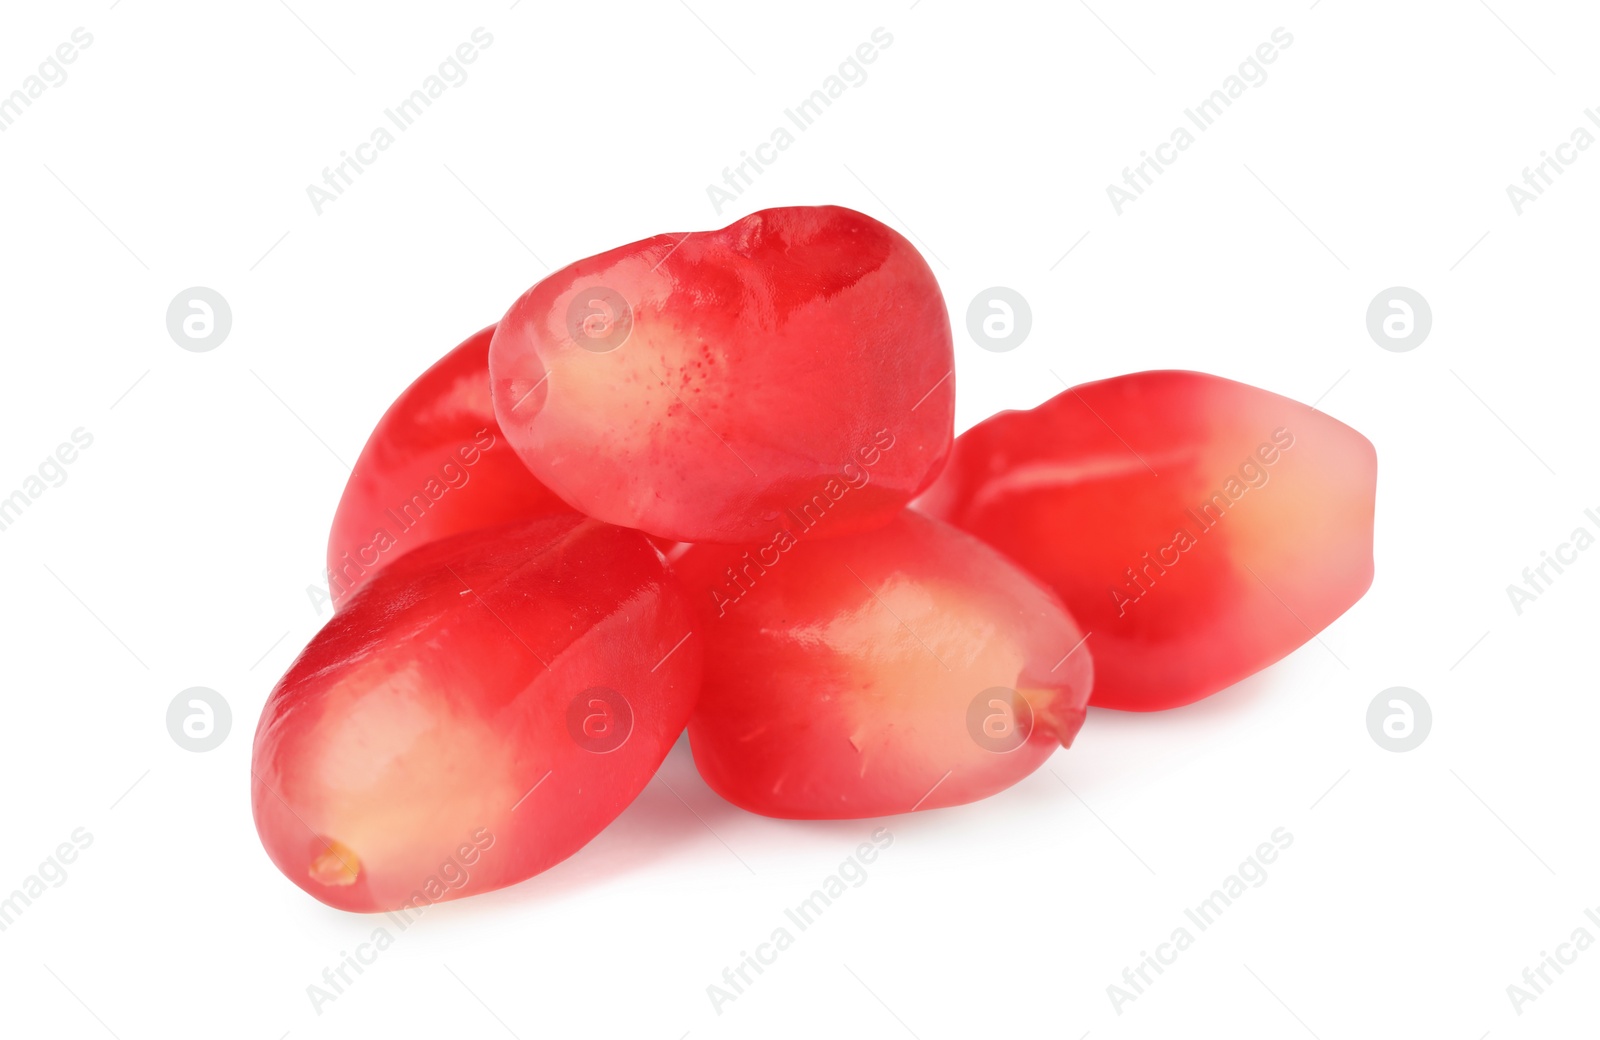 Photo of Juicy red pomegranate seeds on white background